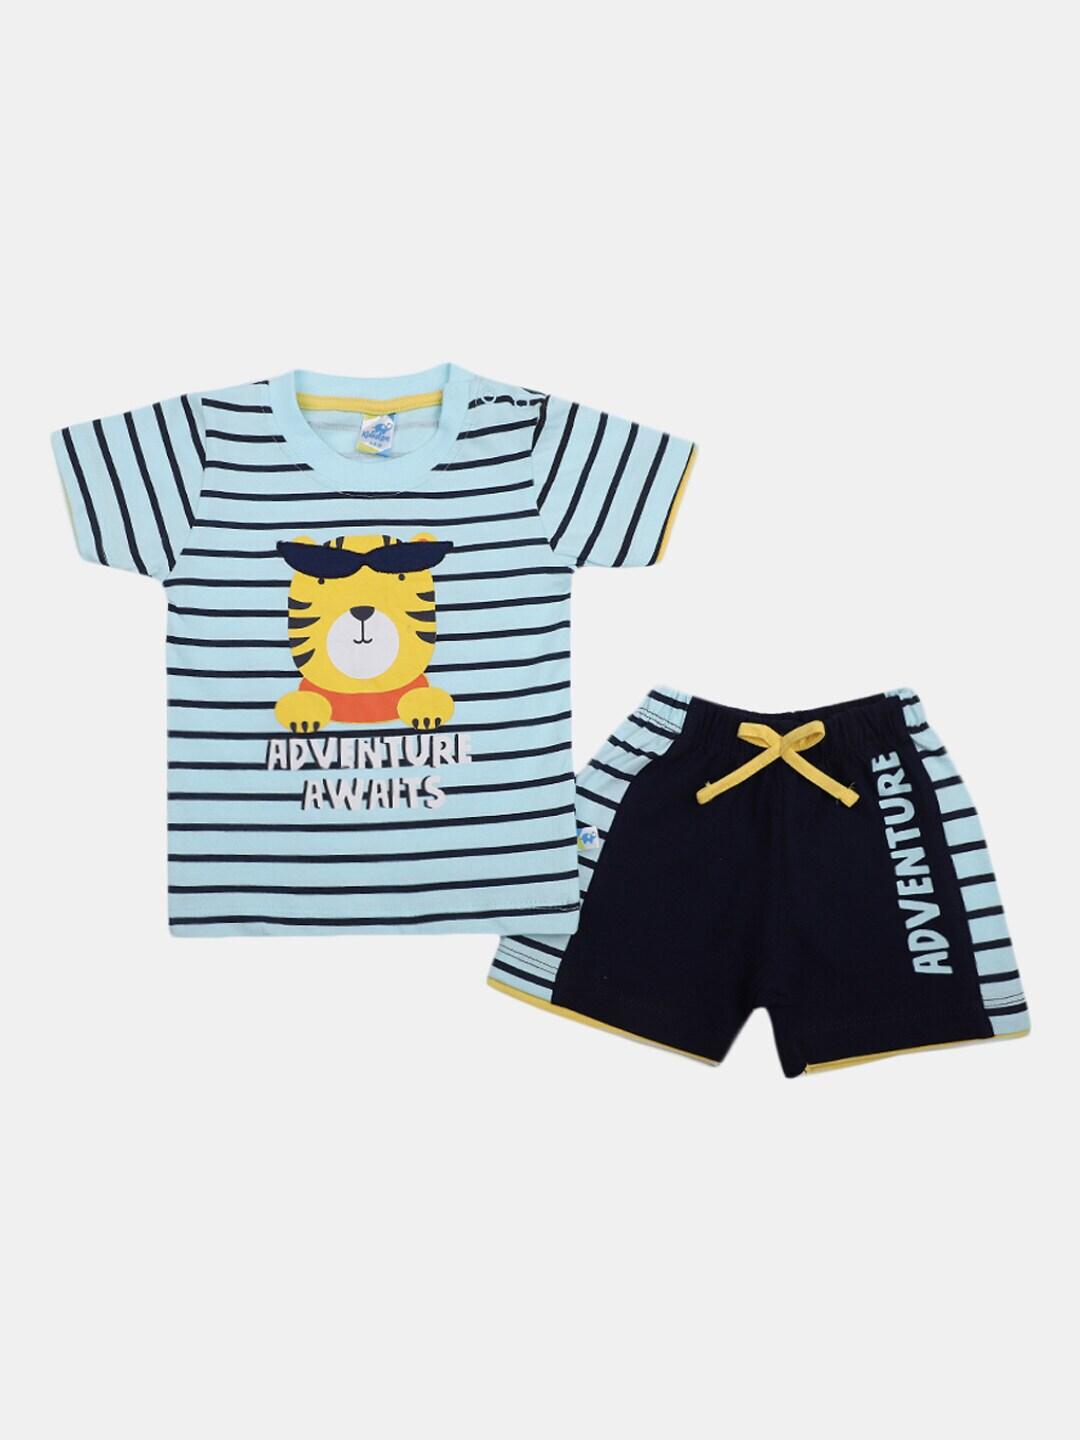 v-mart-infants-striped-pure-cotton-t-shirt-with-shorts-clothing-set